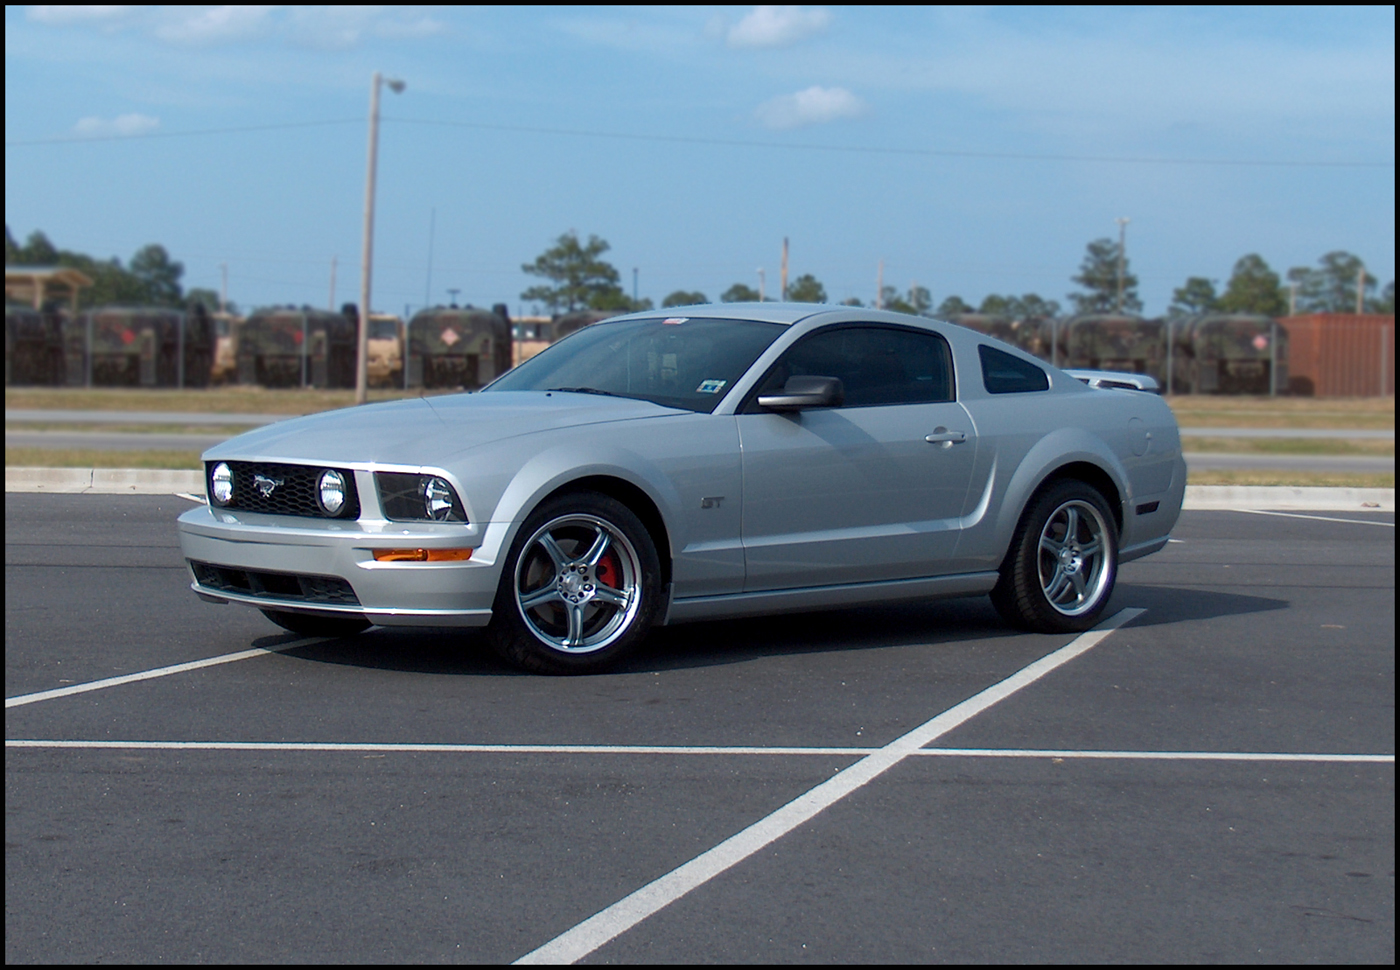 2005 Ford mustang gt 1/4 mile time #9